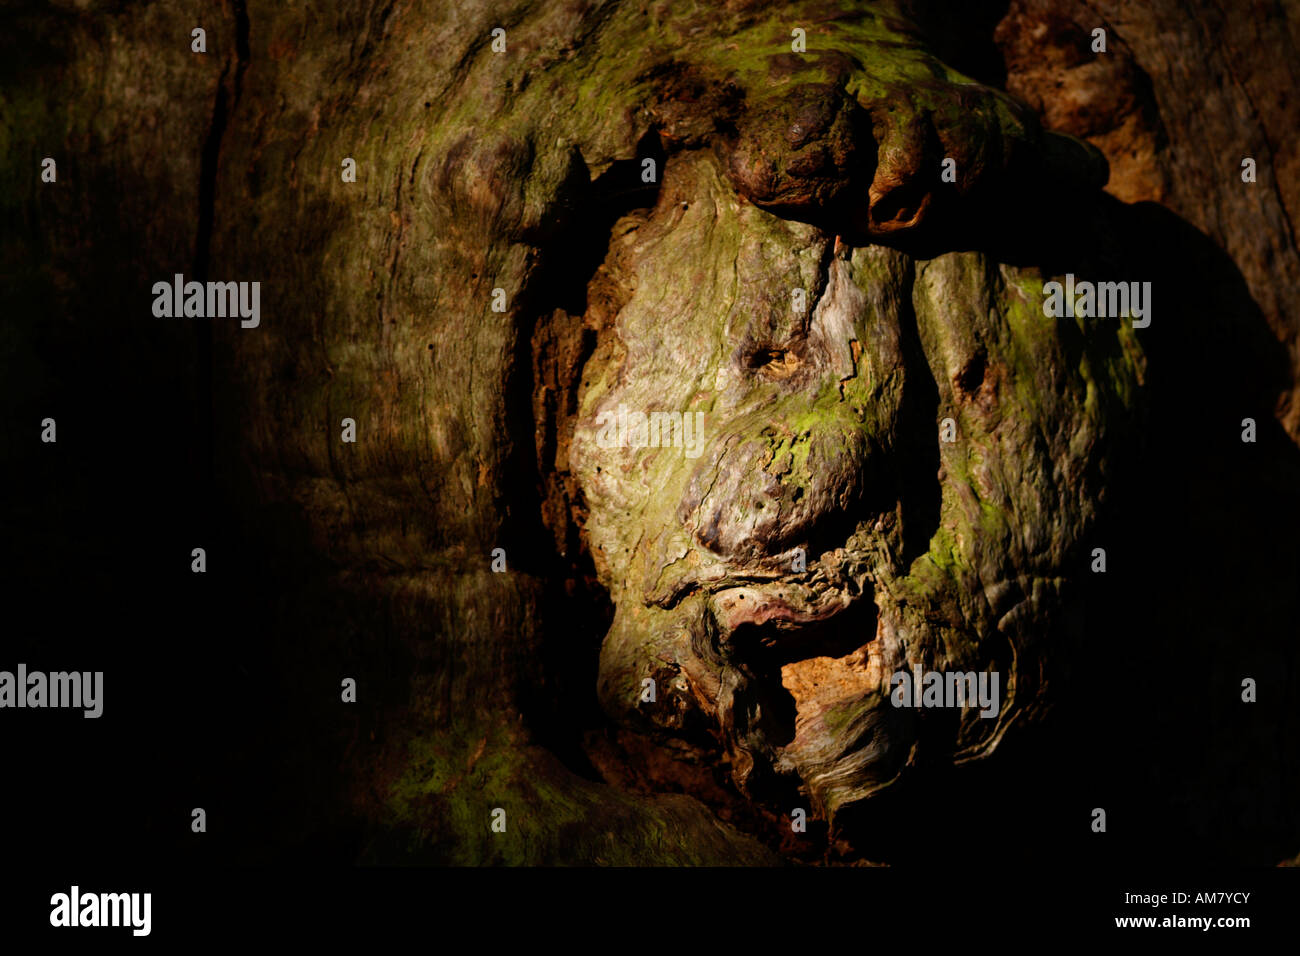 Face-structure on a trunk, jungle Sababurg, Hesse, Germany Stock Photo